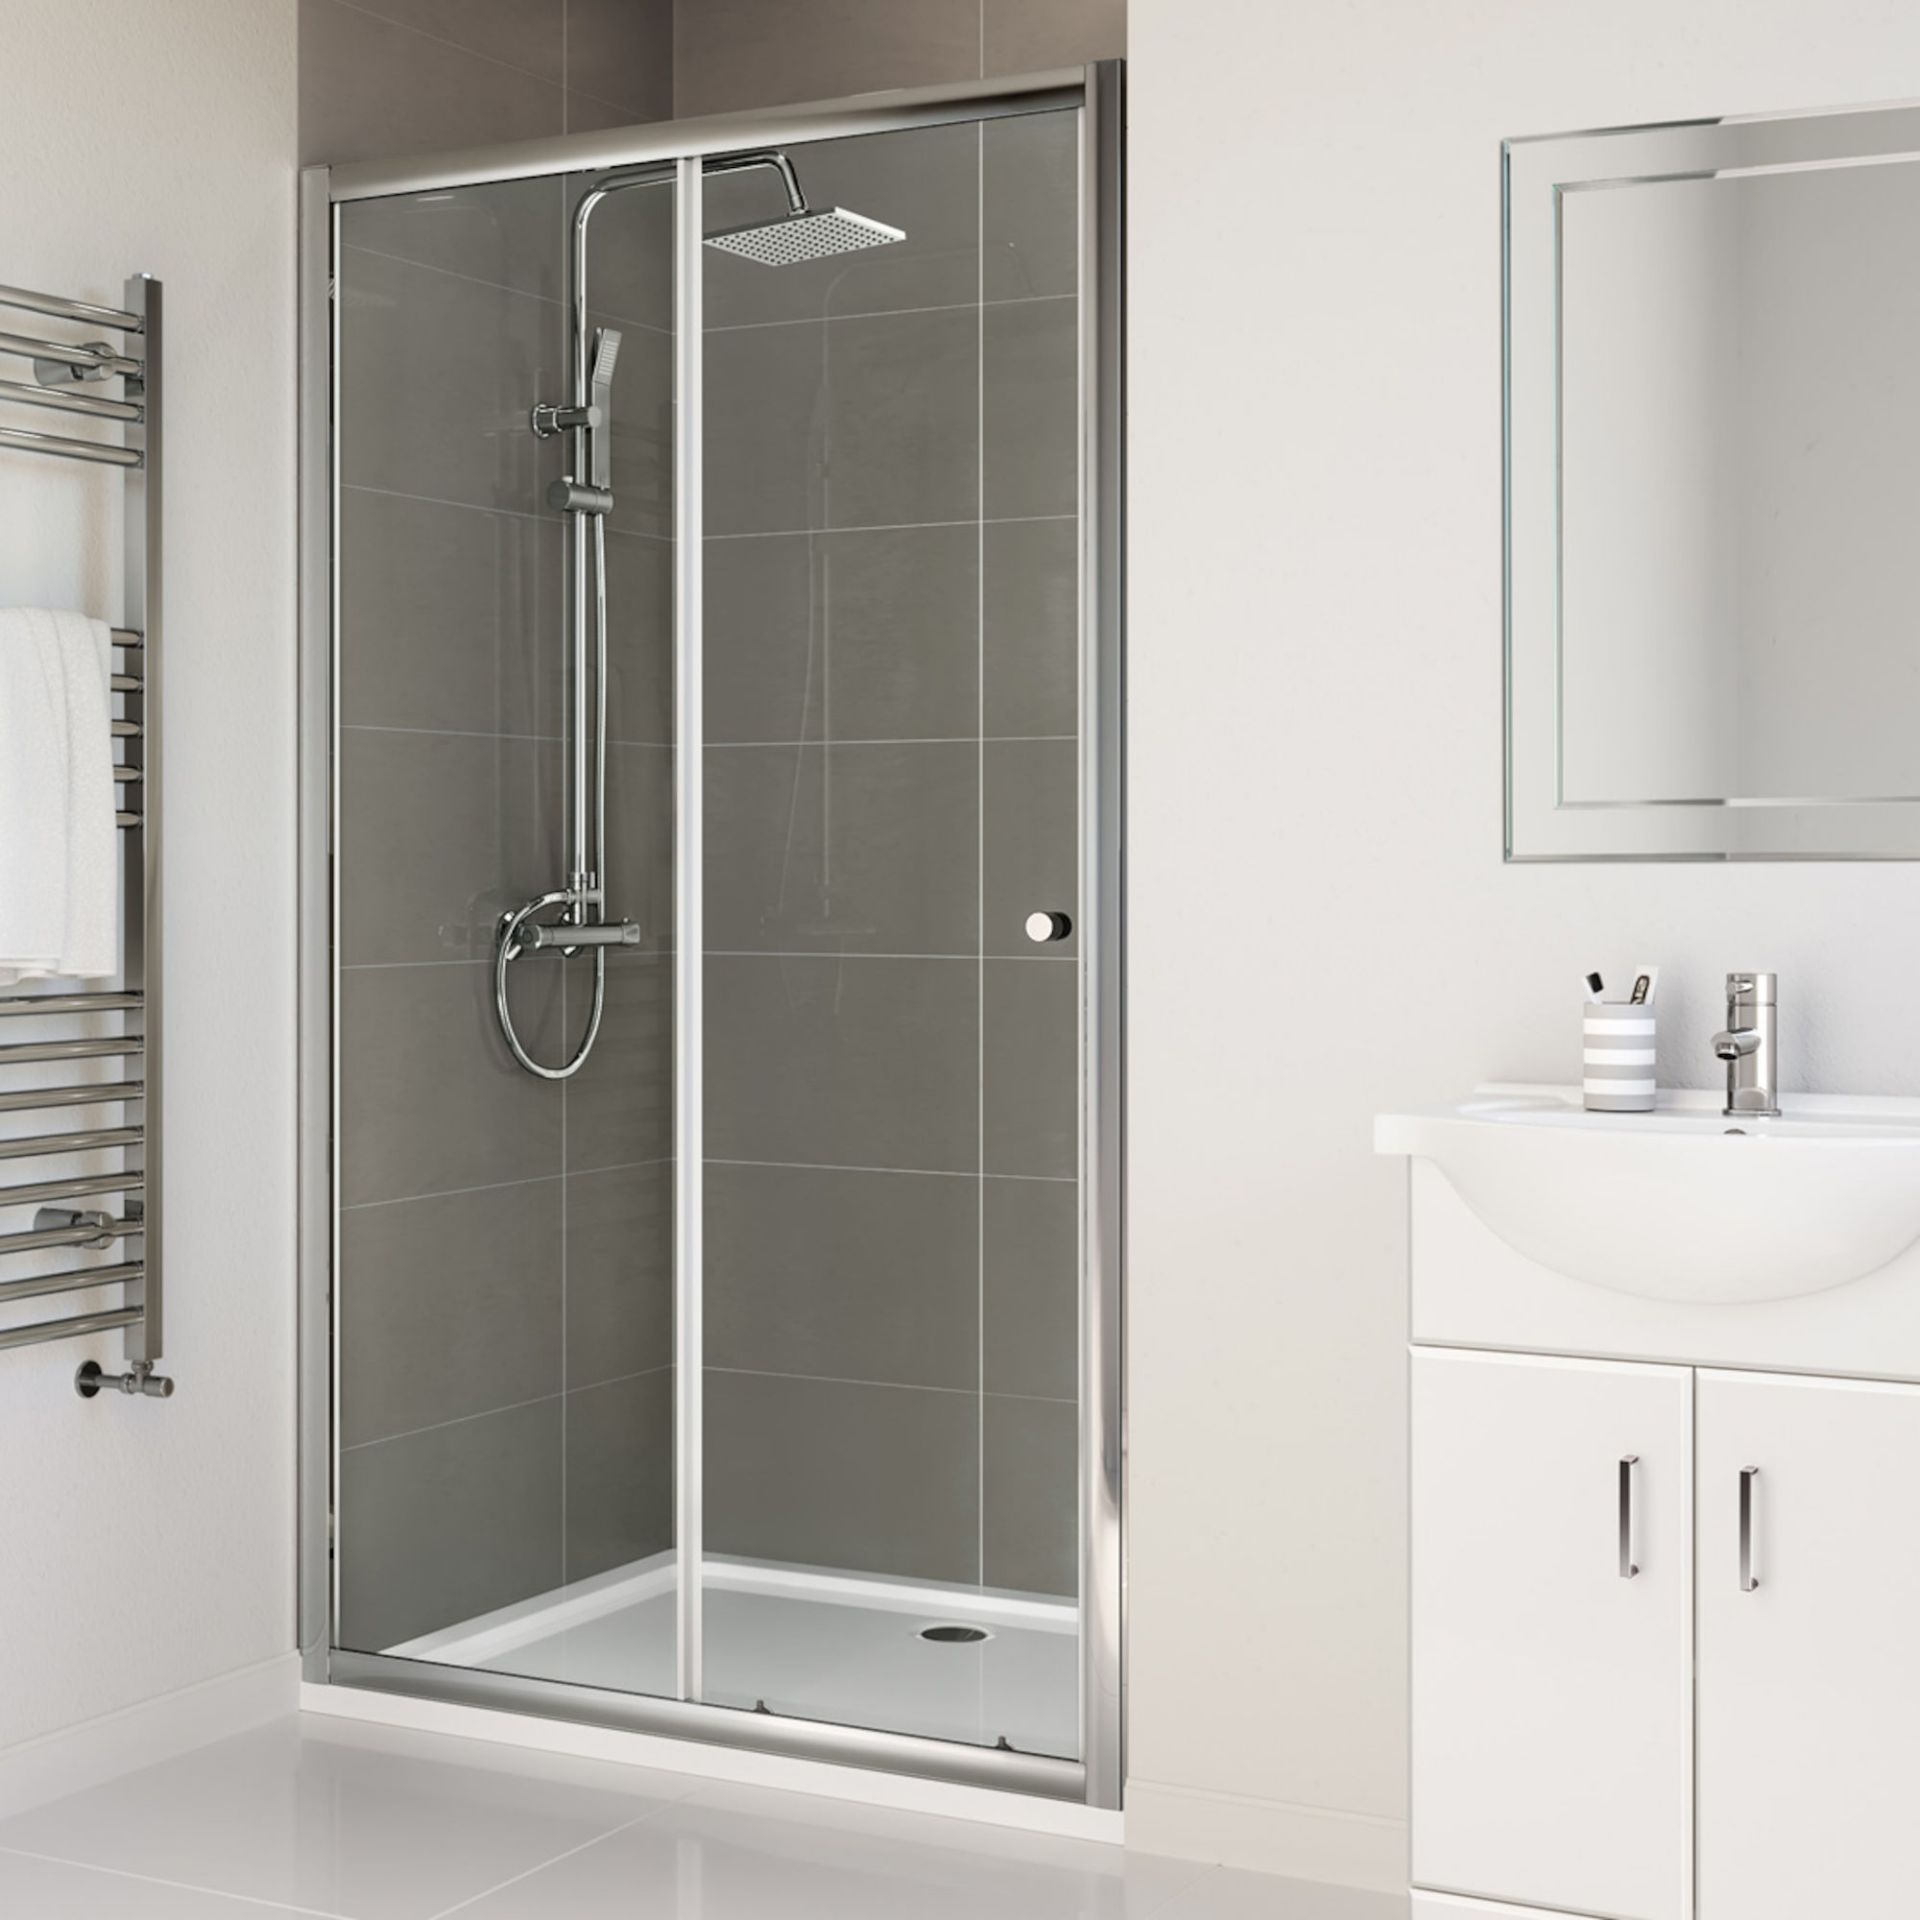 (DK155) 1000mm - Elements Sliding Shower Door. RRP £299.99. 4mm Safety Glass Fully waterproof tested